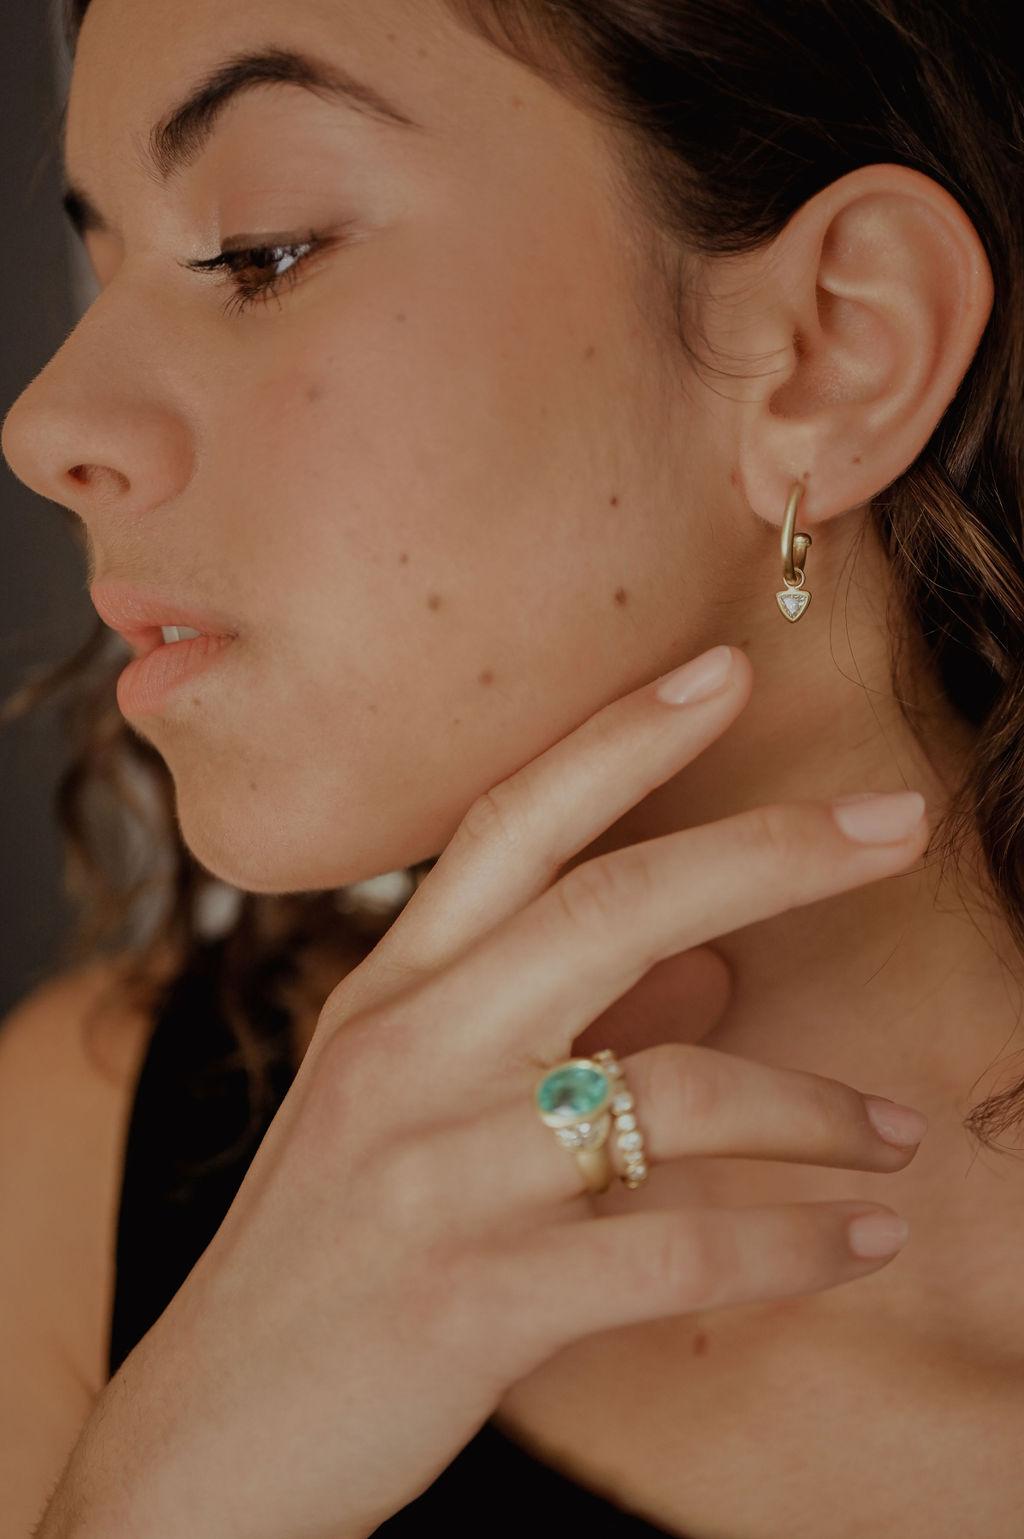 Faye Kim's must-have 18k gold hoops on posts.  A classic look, timeless in design.  Shown here with our Trillion diamond drops to add extra sparkle.  Stylish and great for daily wear.  

The drops are removable and photographed on a variety of Faye